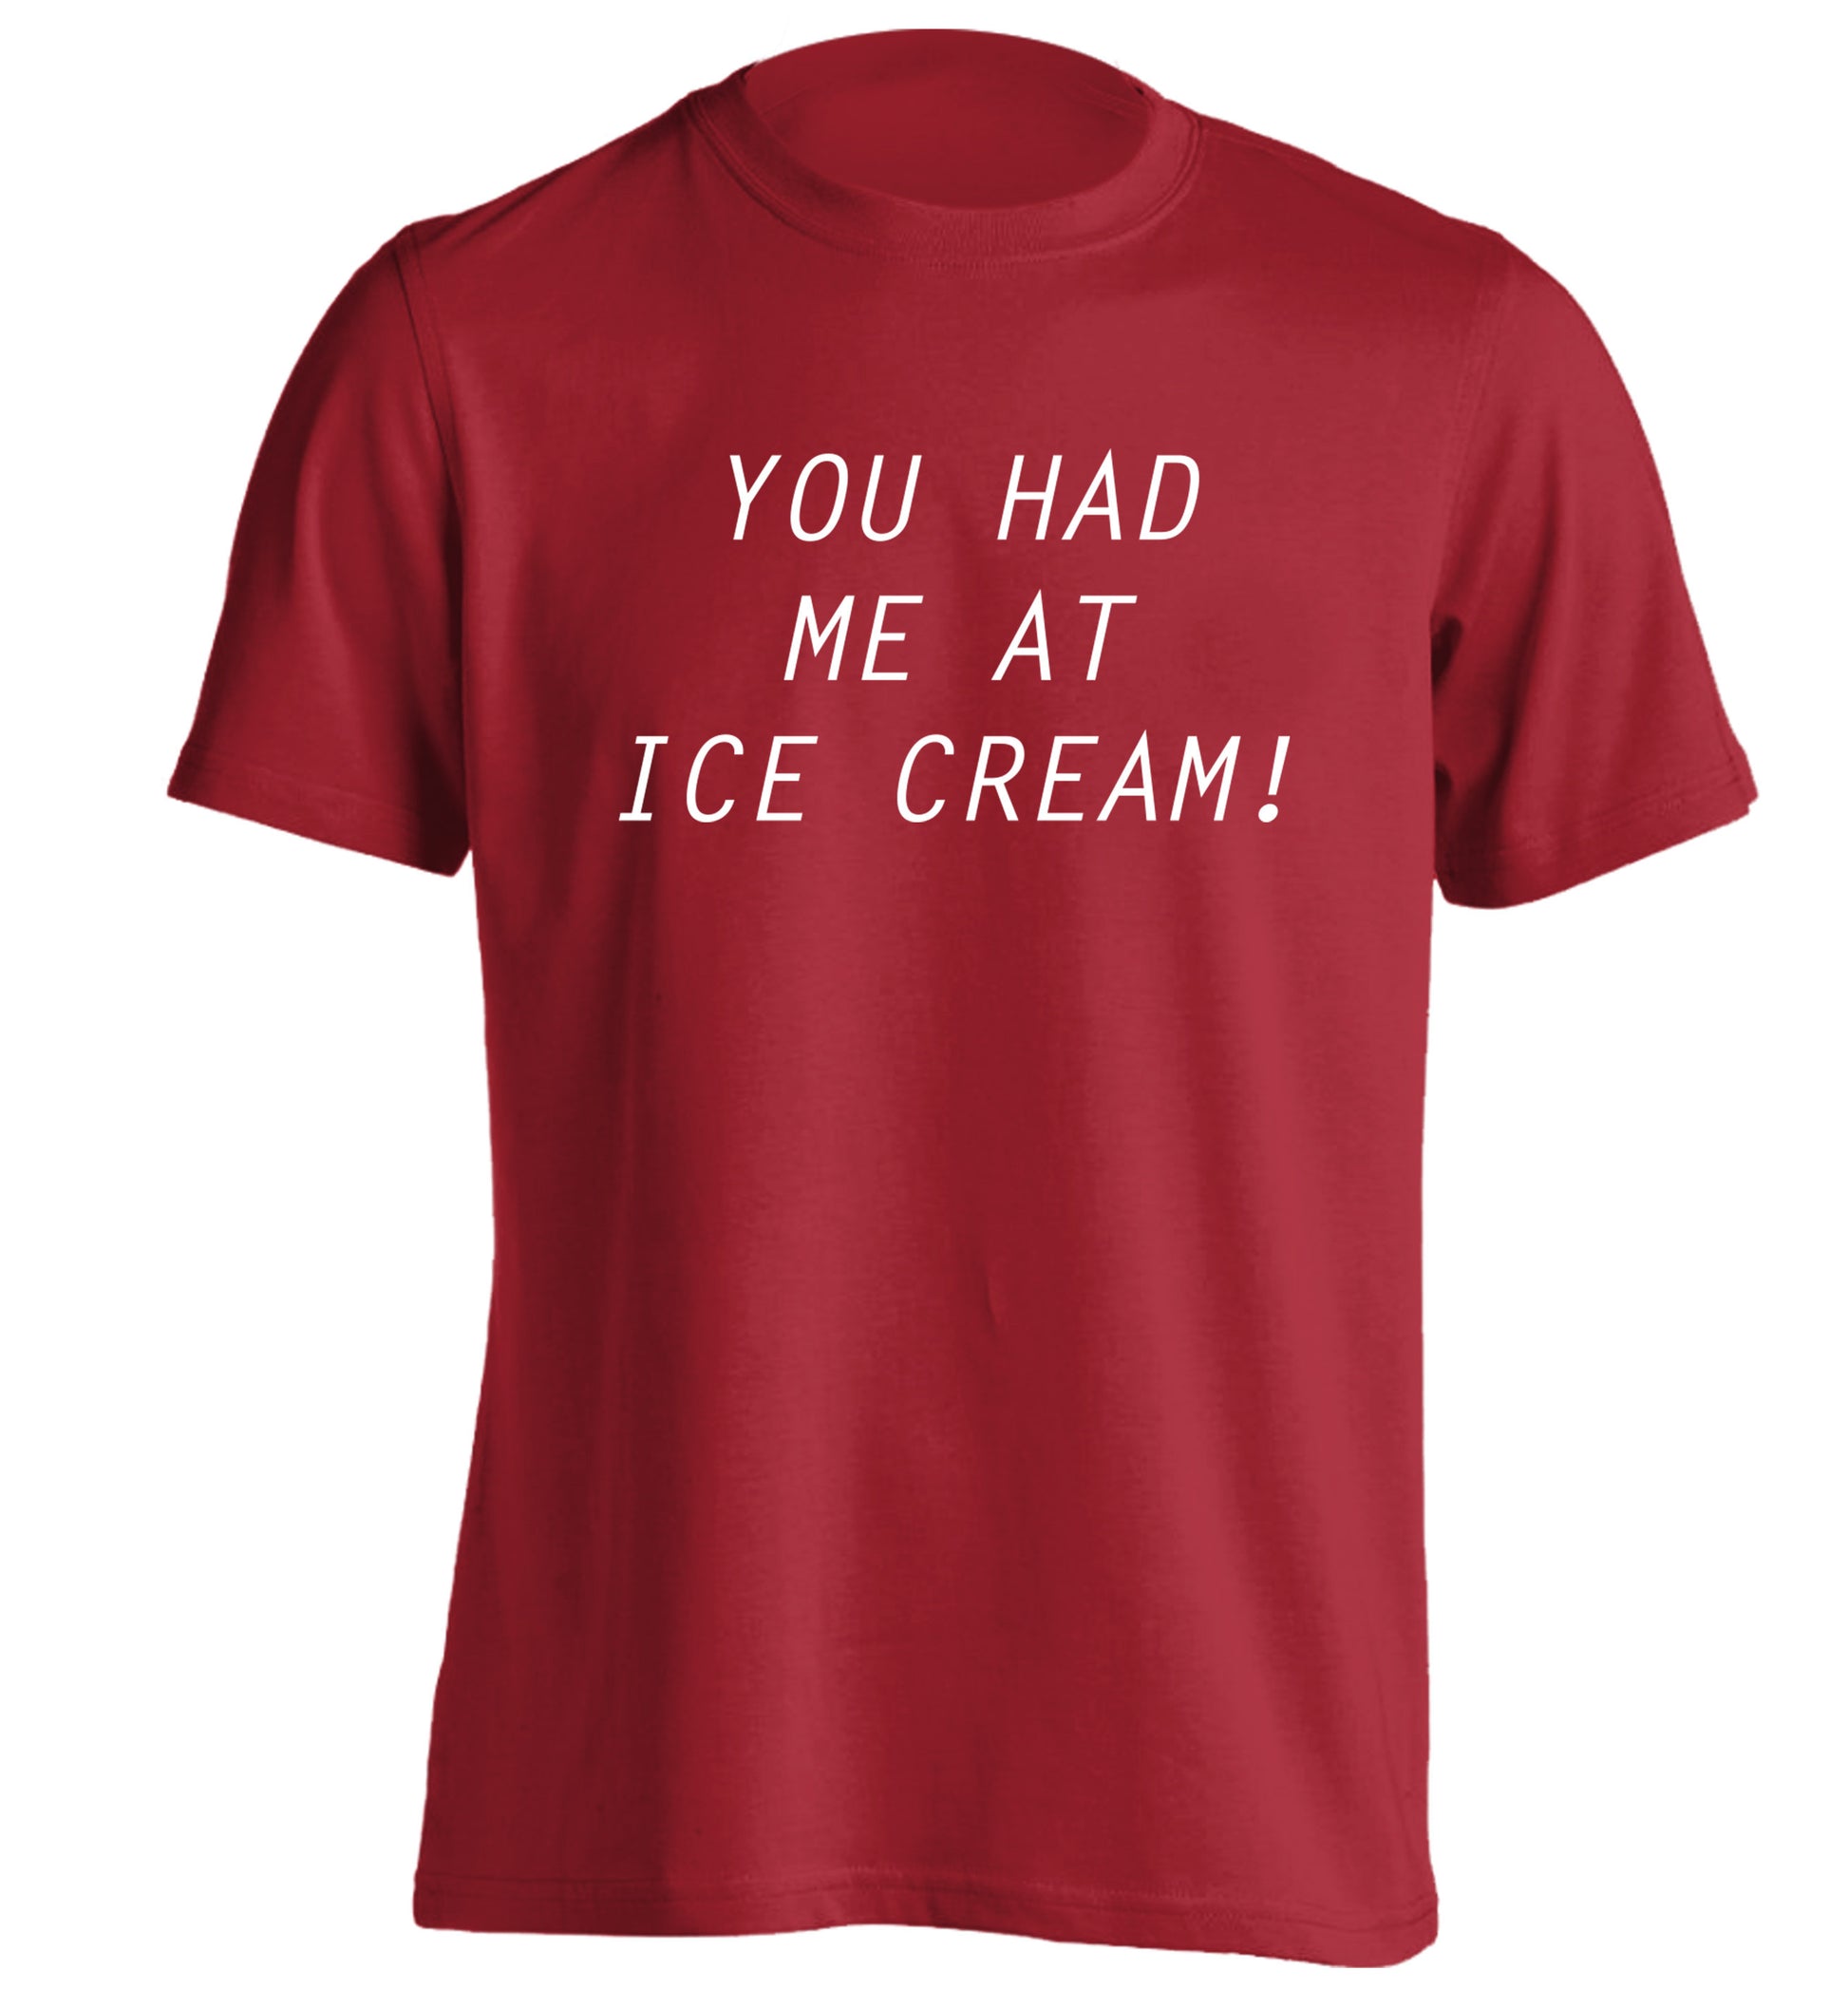 You had me at ice cream adults unisex red Tshirt 2XL